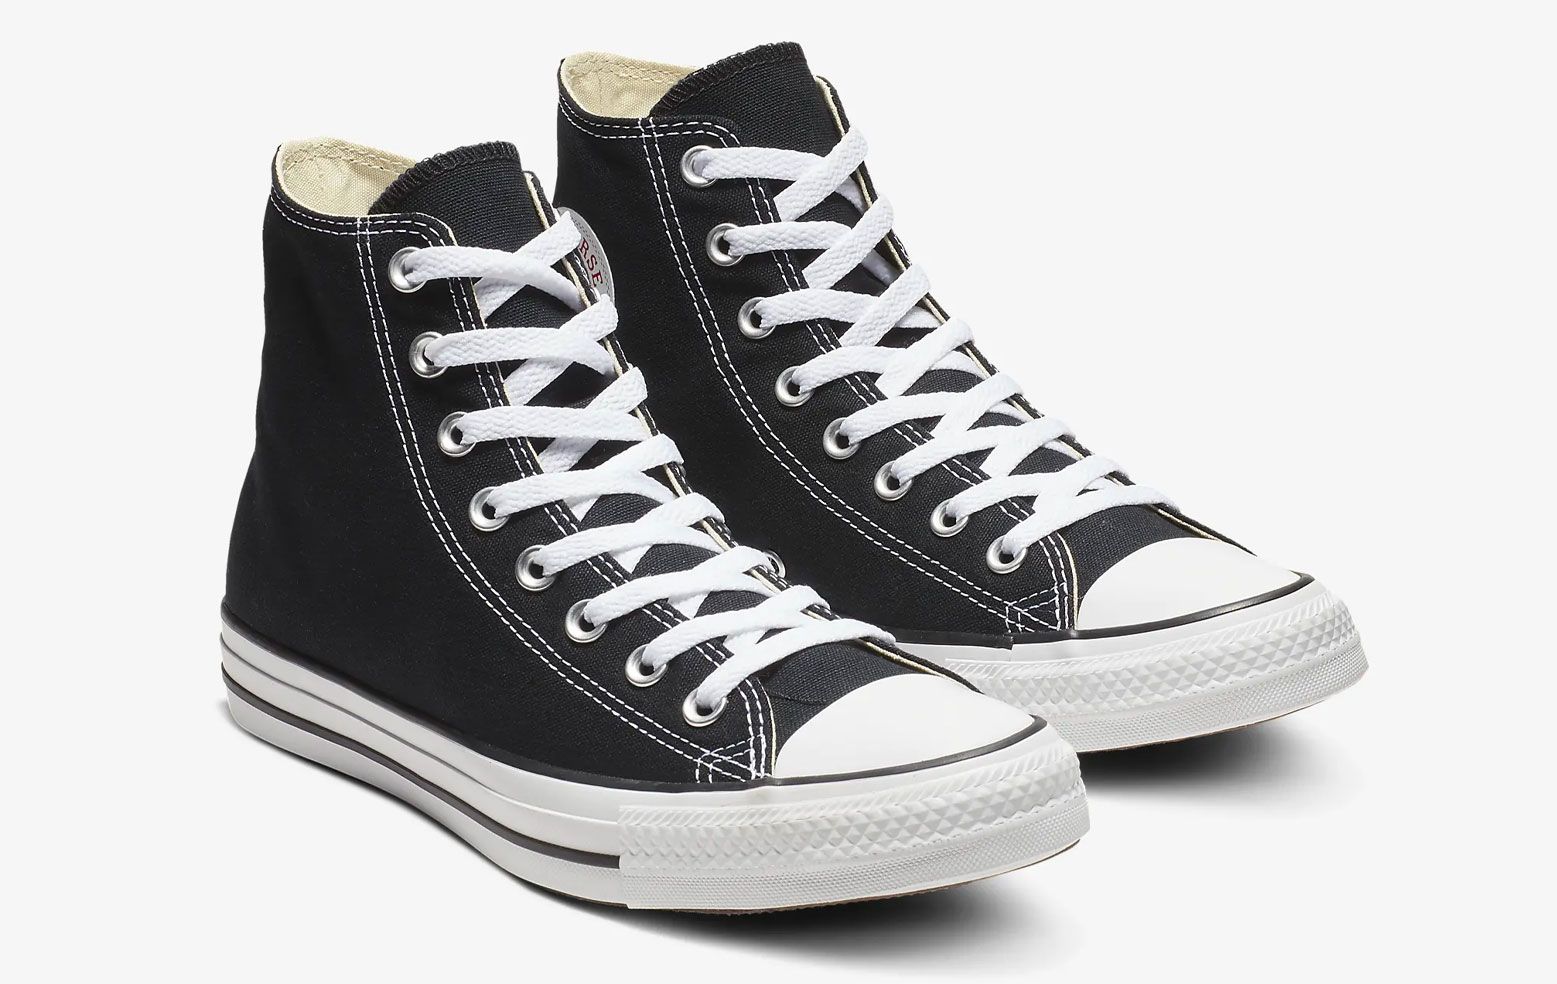 Converse Chuck Taylor All Star Classic Hi "Black White" product image of a pair of black canvas high-tops with white rubber midsoles.